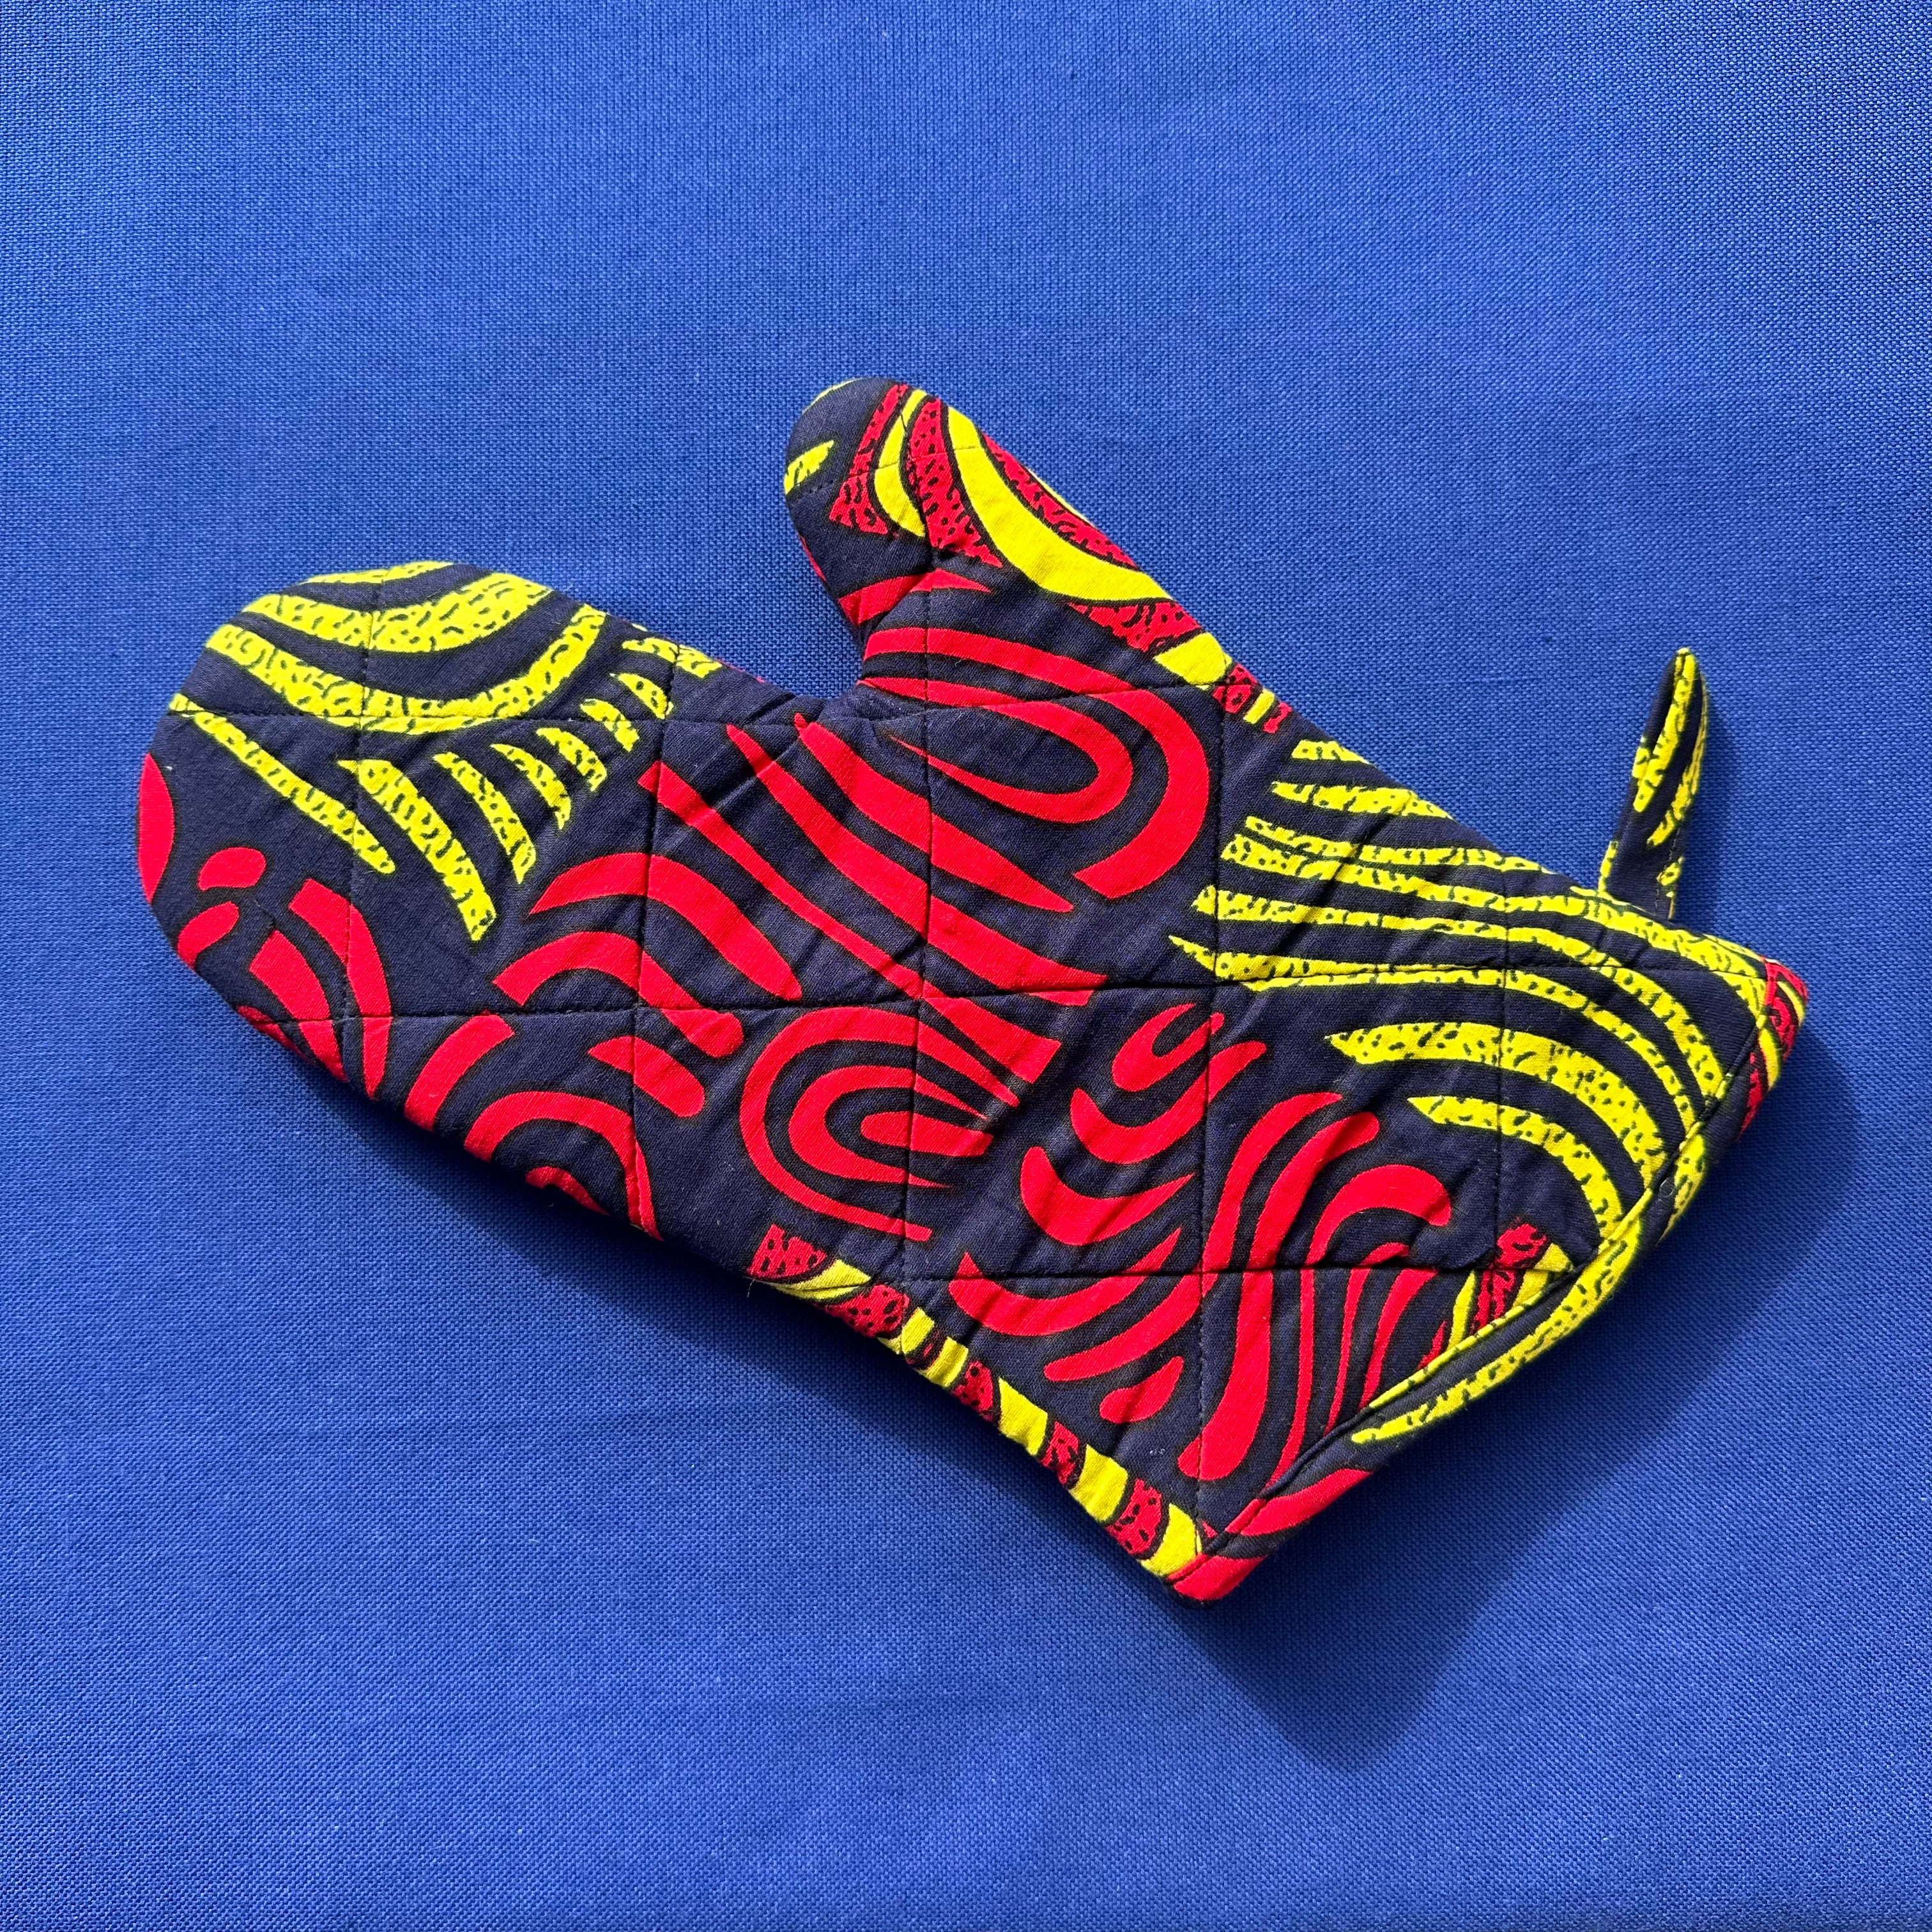 Display of yellow, red and black oven mitt 